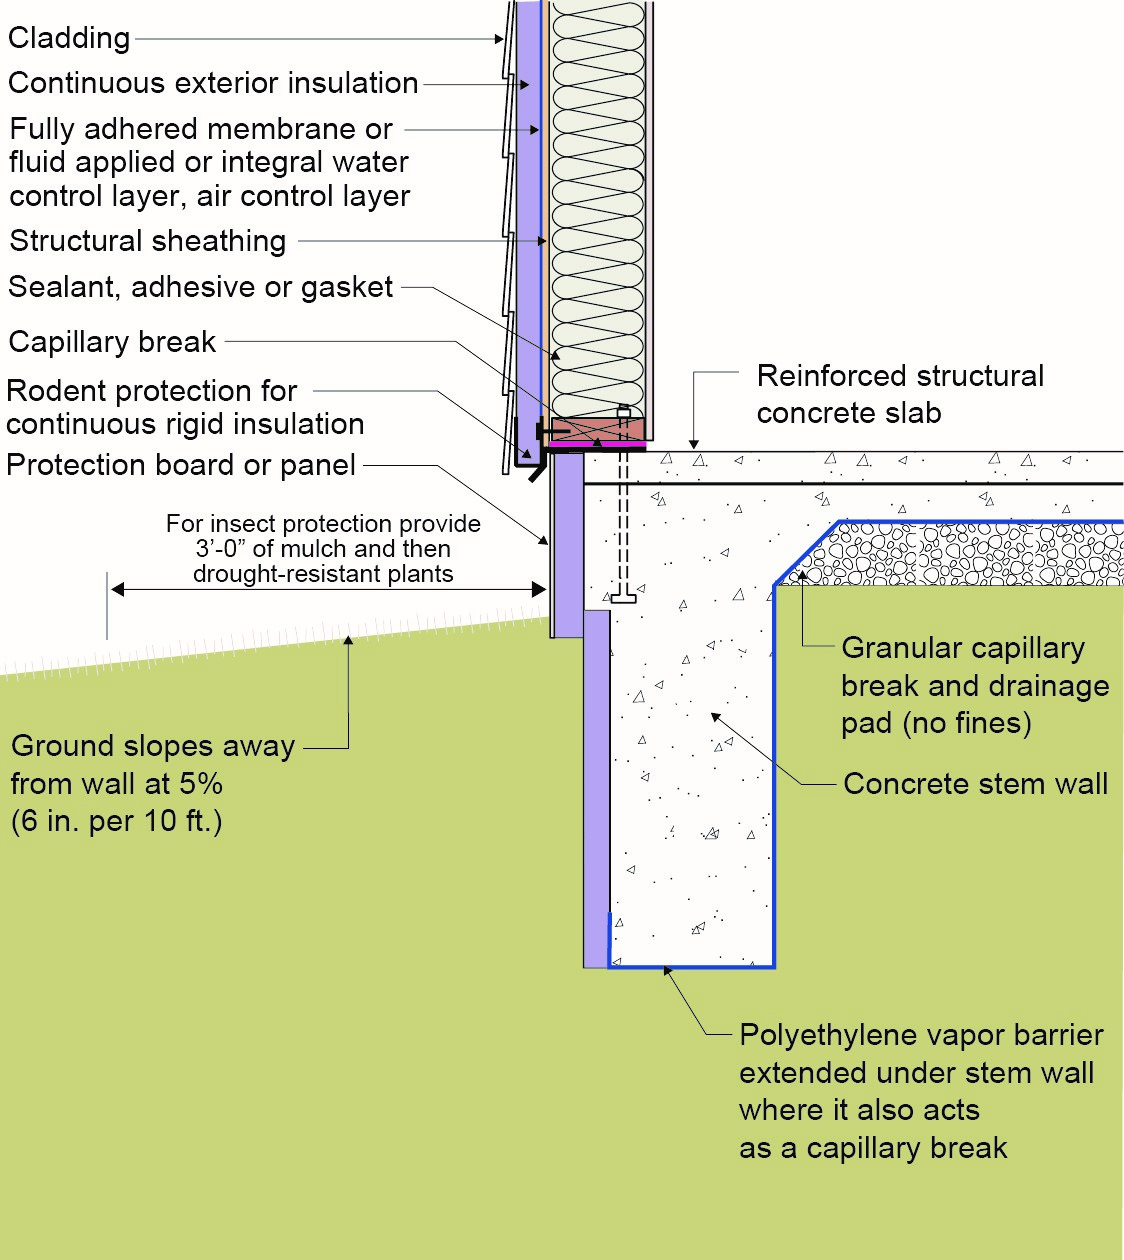 Externally insulated post-tensioned concrete slab-on-grade foundation ...